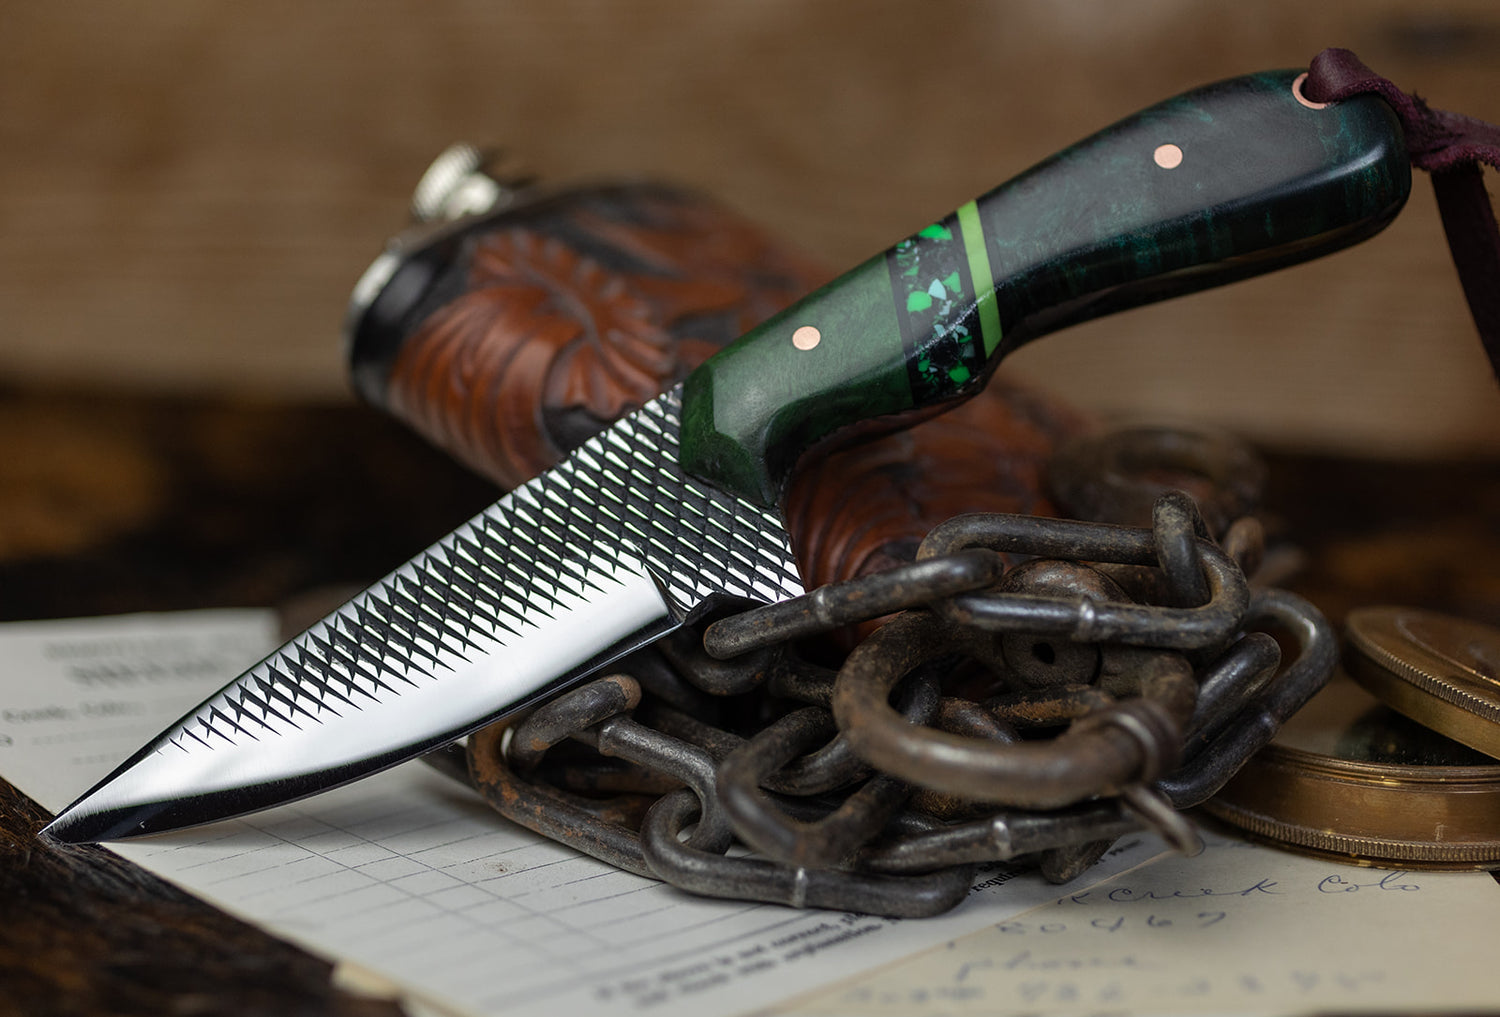 Stetson forge maverick style knife with farrier rasp blade and segmented handle